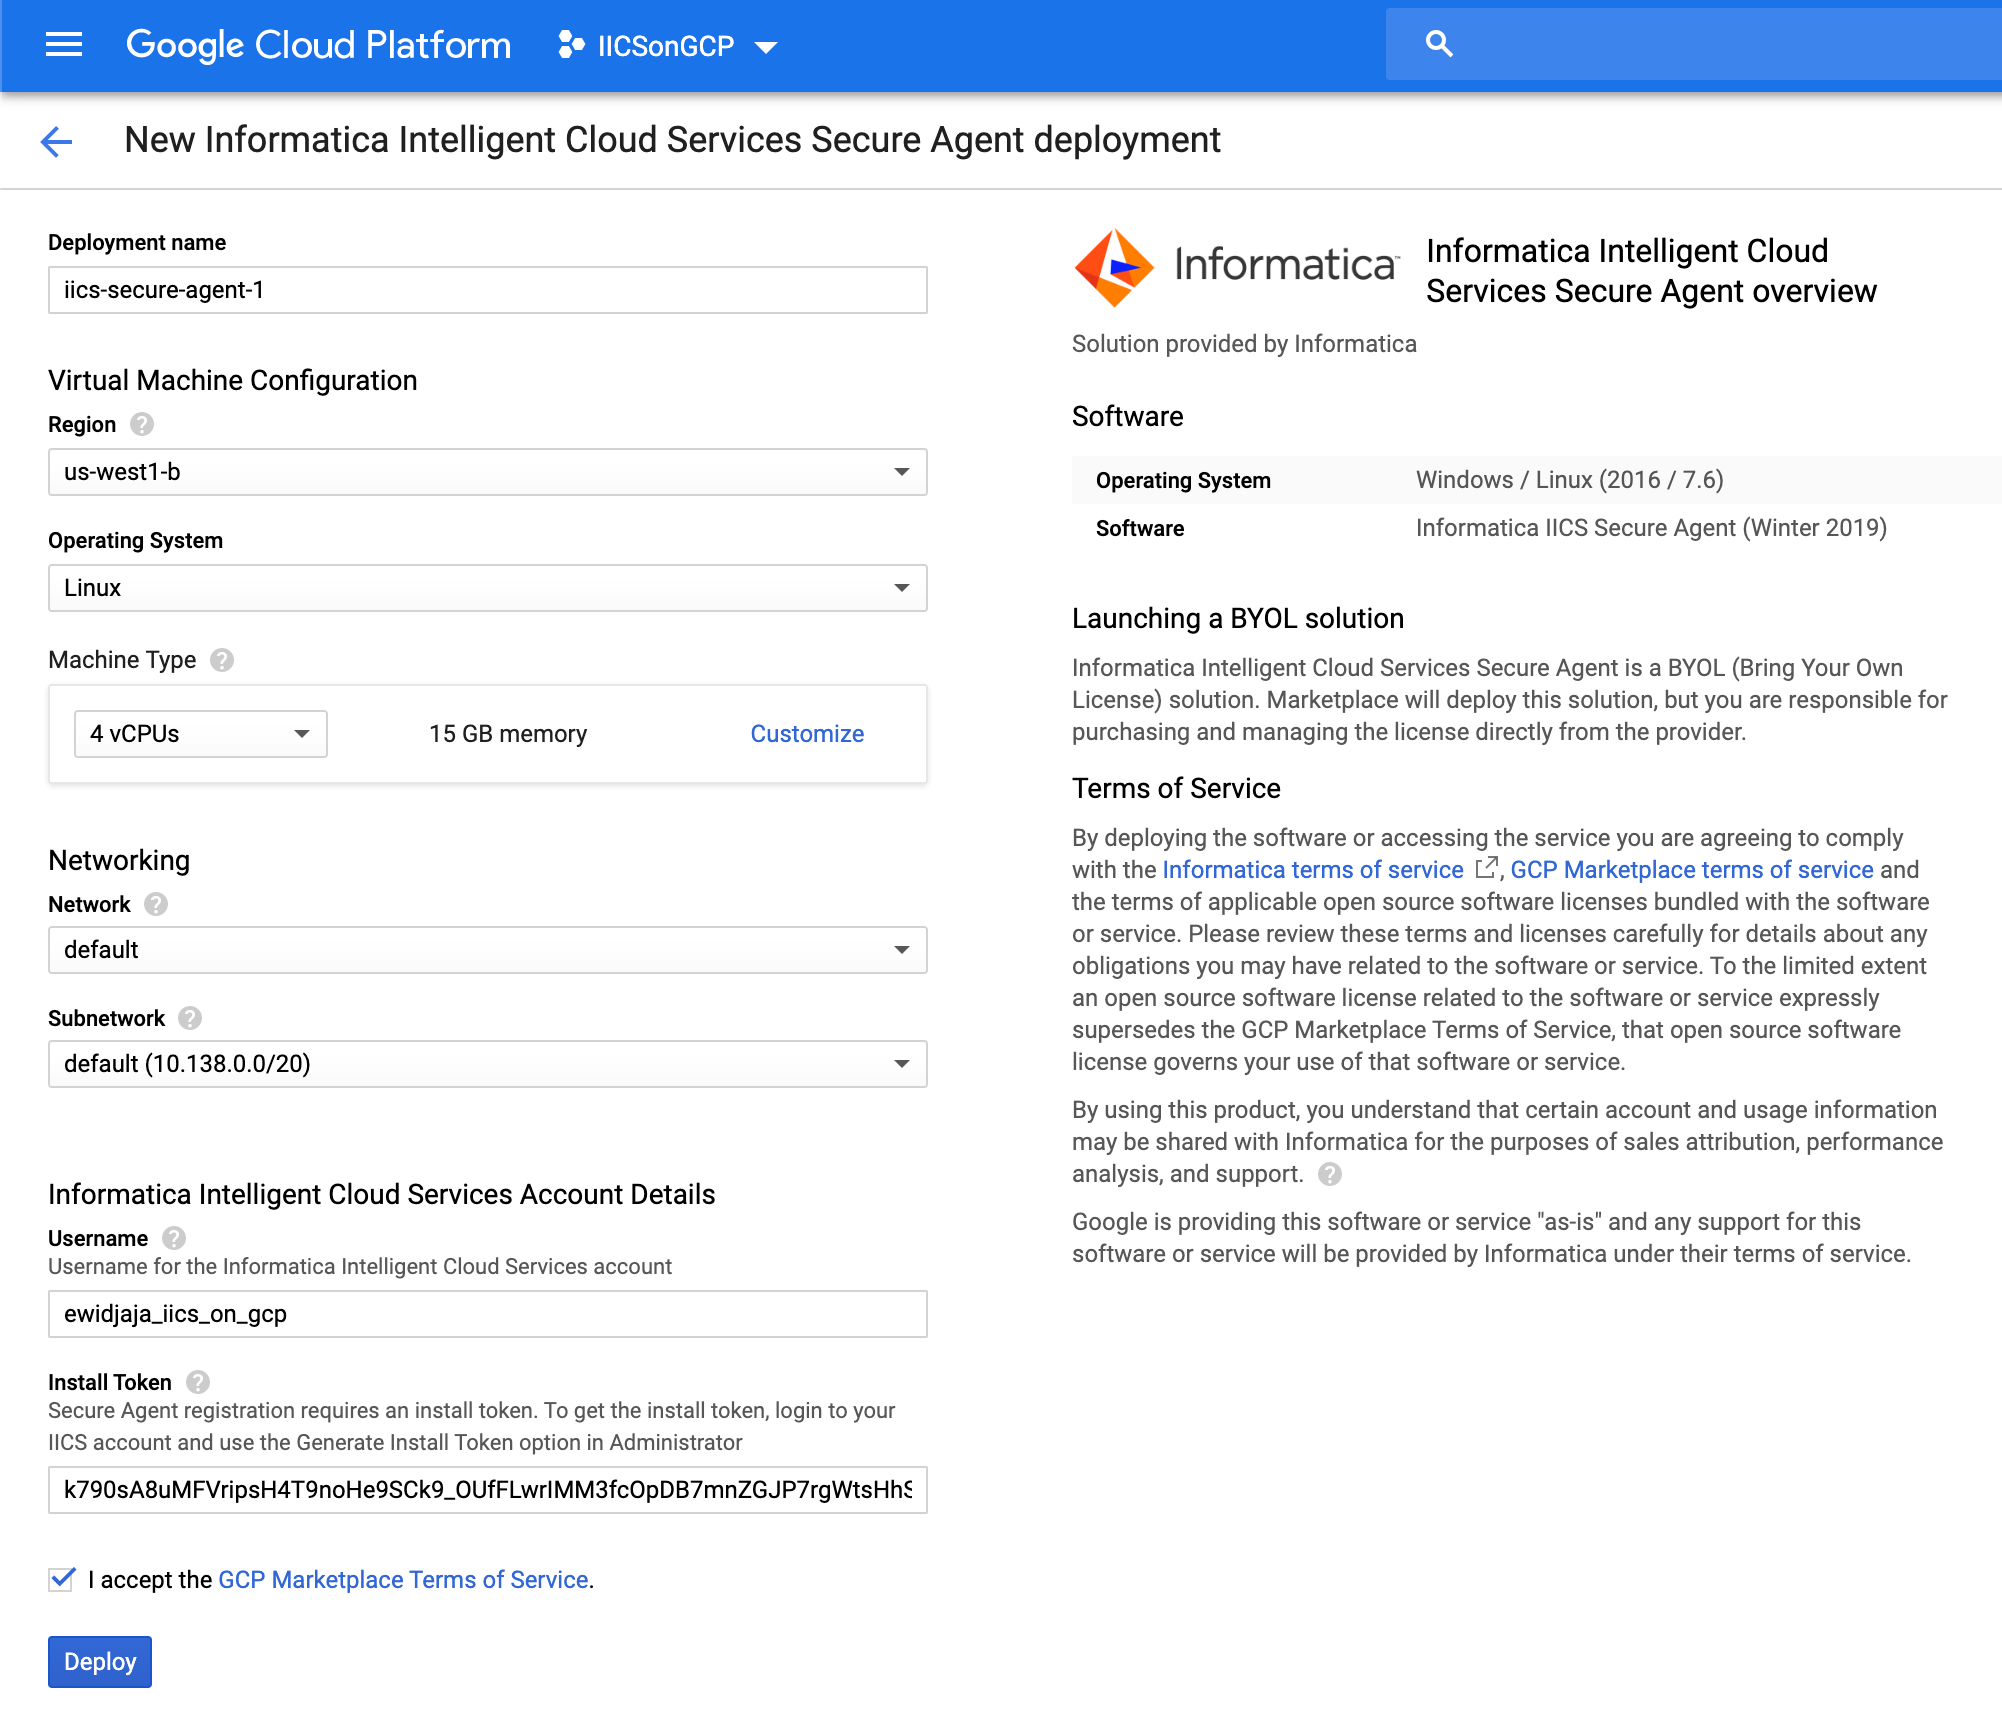 The "New Informatica Intelligent Cloud Services Secure Agent deployment" page lists the deployment name, virtual machine configuration properties, networking properties, and IICS account details. The Deploy button appears at the bottom of the page. 
				  